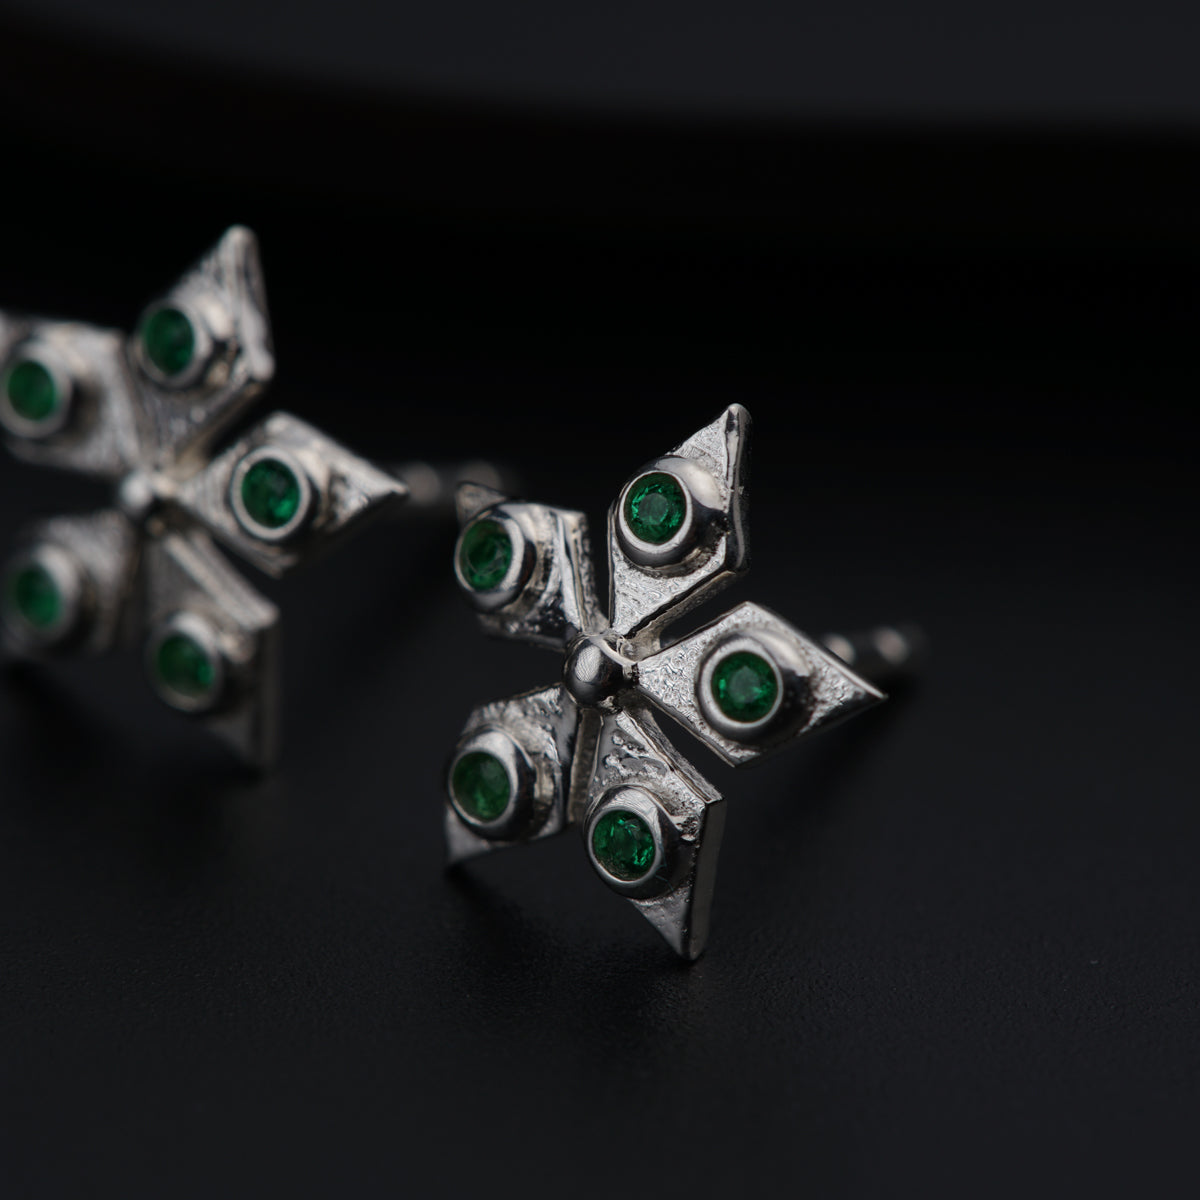 a pair of silver earrings with green stones